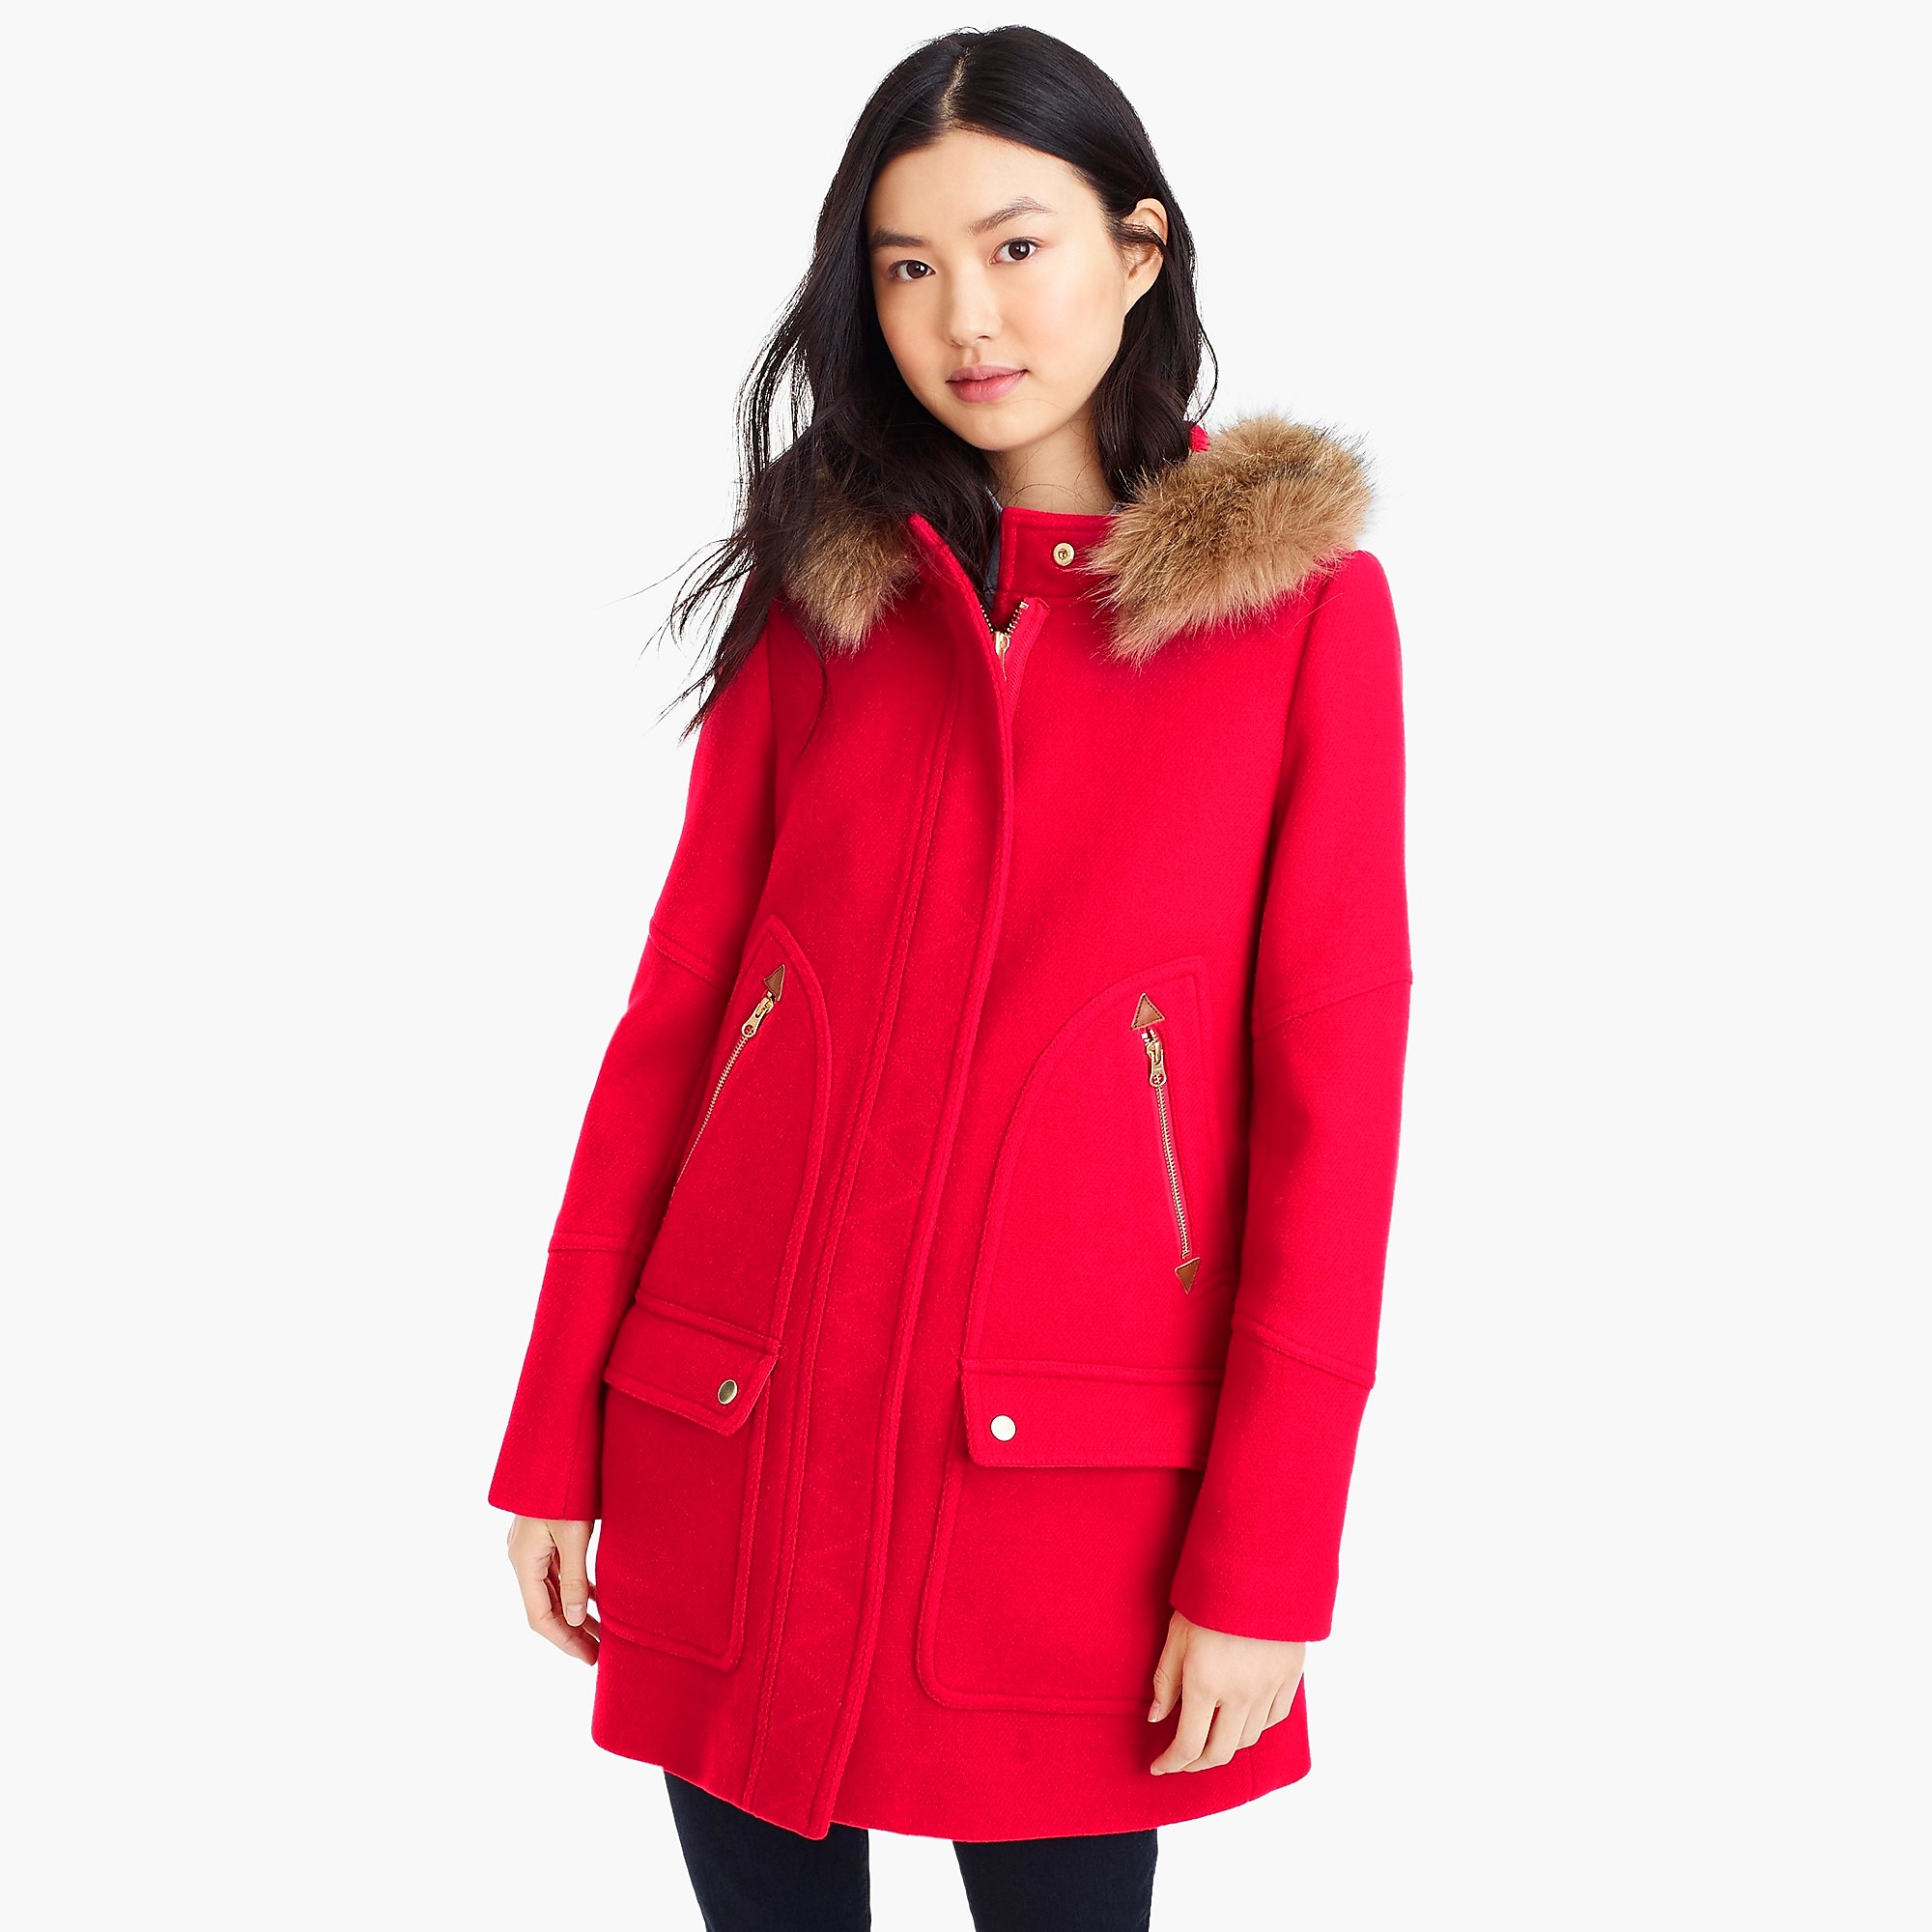 The Look For Less: J Crew Chateau Parka